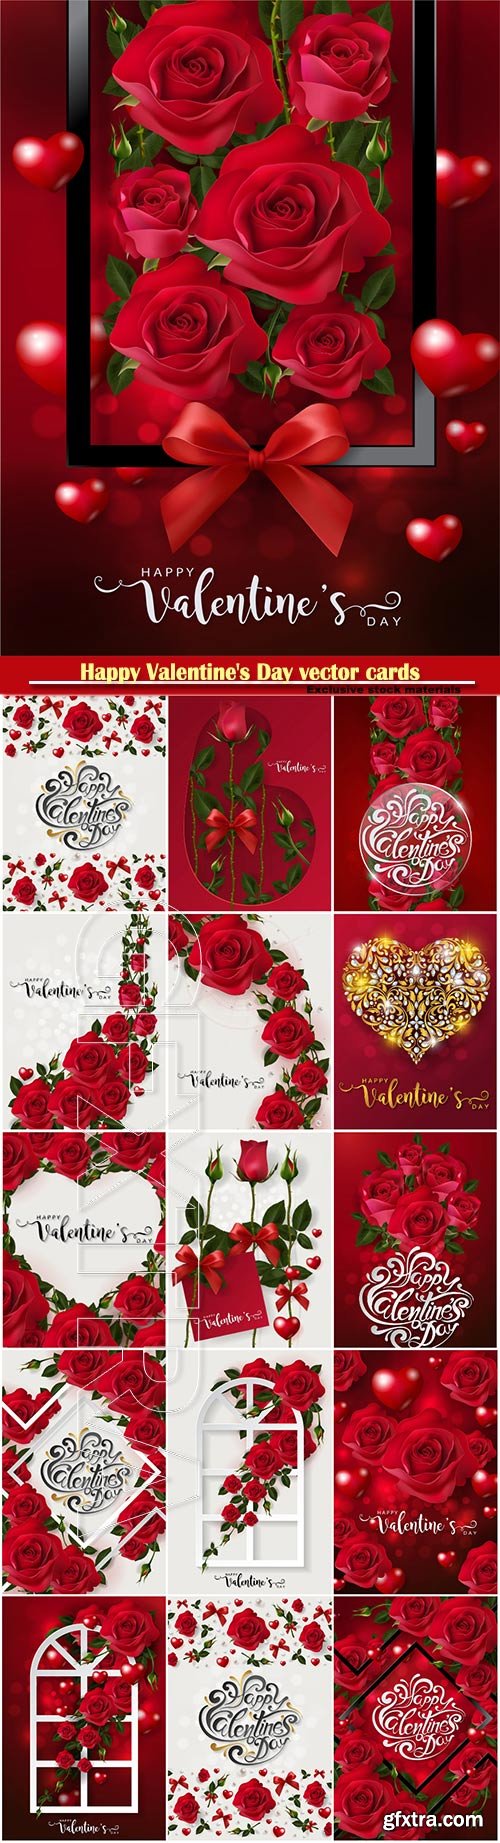 Happy Valentine\'s Day vector cards, red roses and hearts, romantic backgrounds # 4